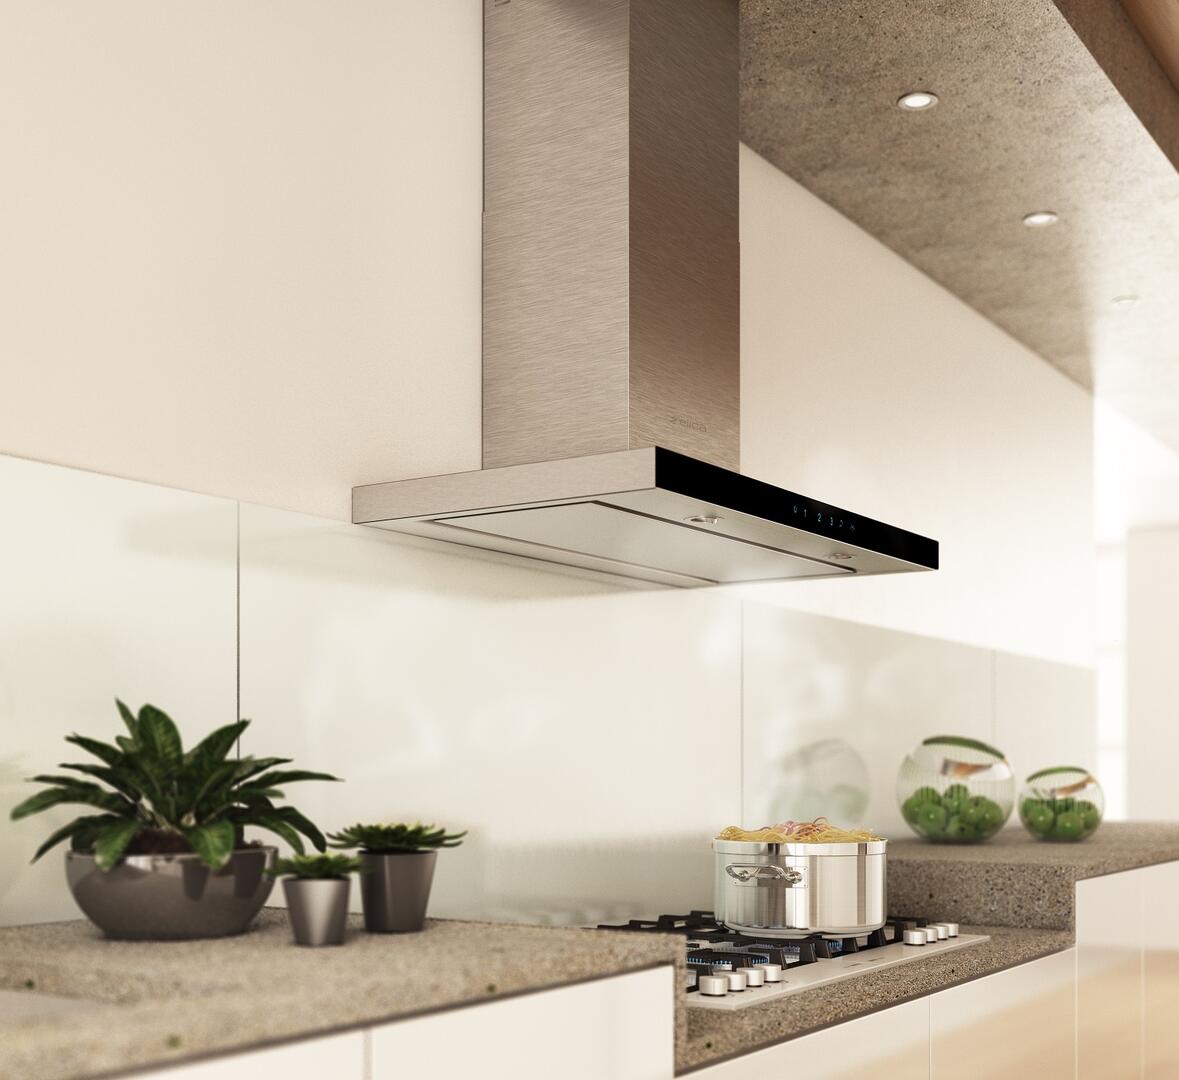 Elica - LUGANO - Techne - 30" W x 19 11/16" D x 5" H, Stainless & Black Glass - Wall Mount Hoods | ELG630S3